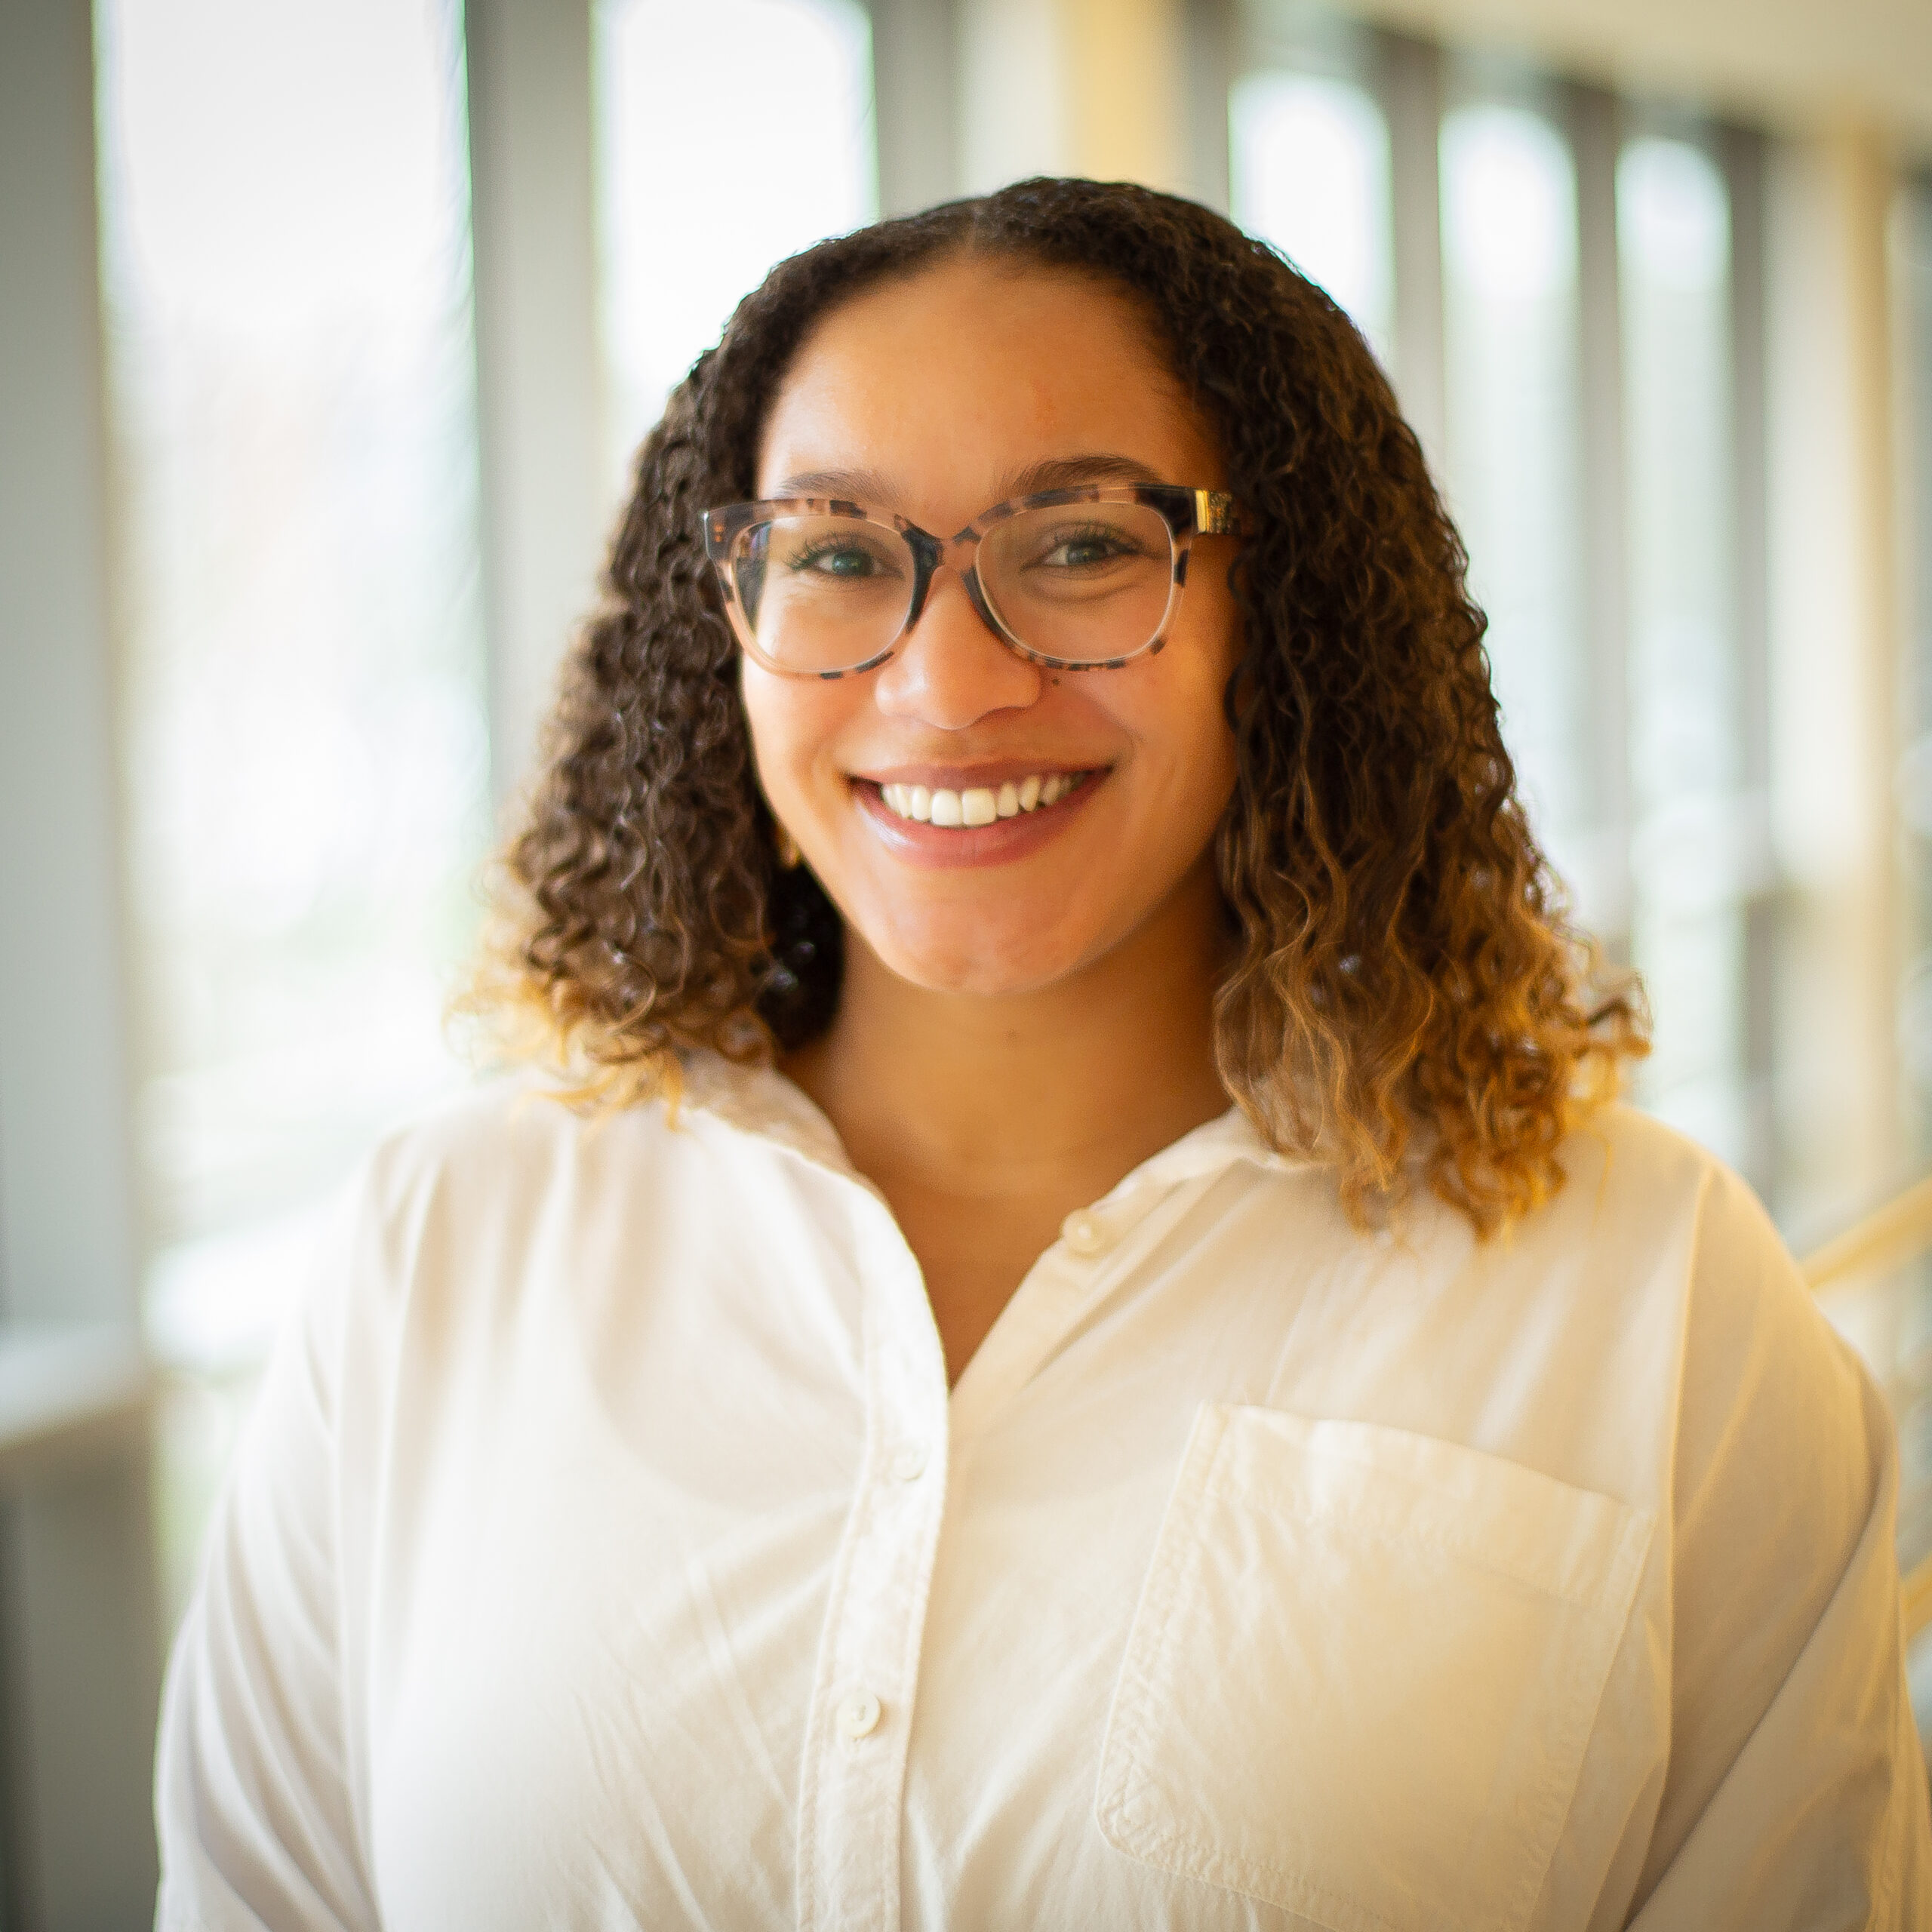 Kayla Duncan joins Polis Center as Equity Data Analyst